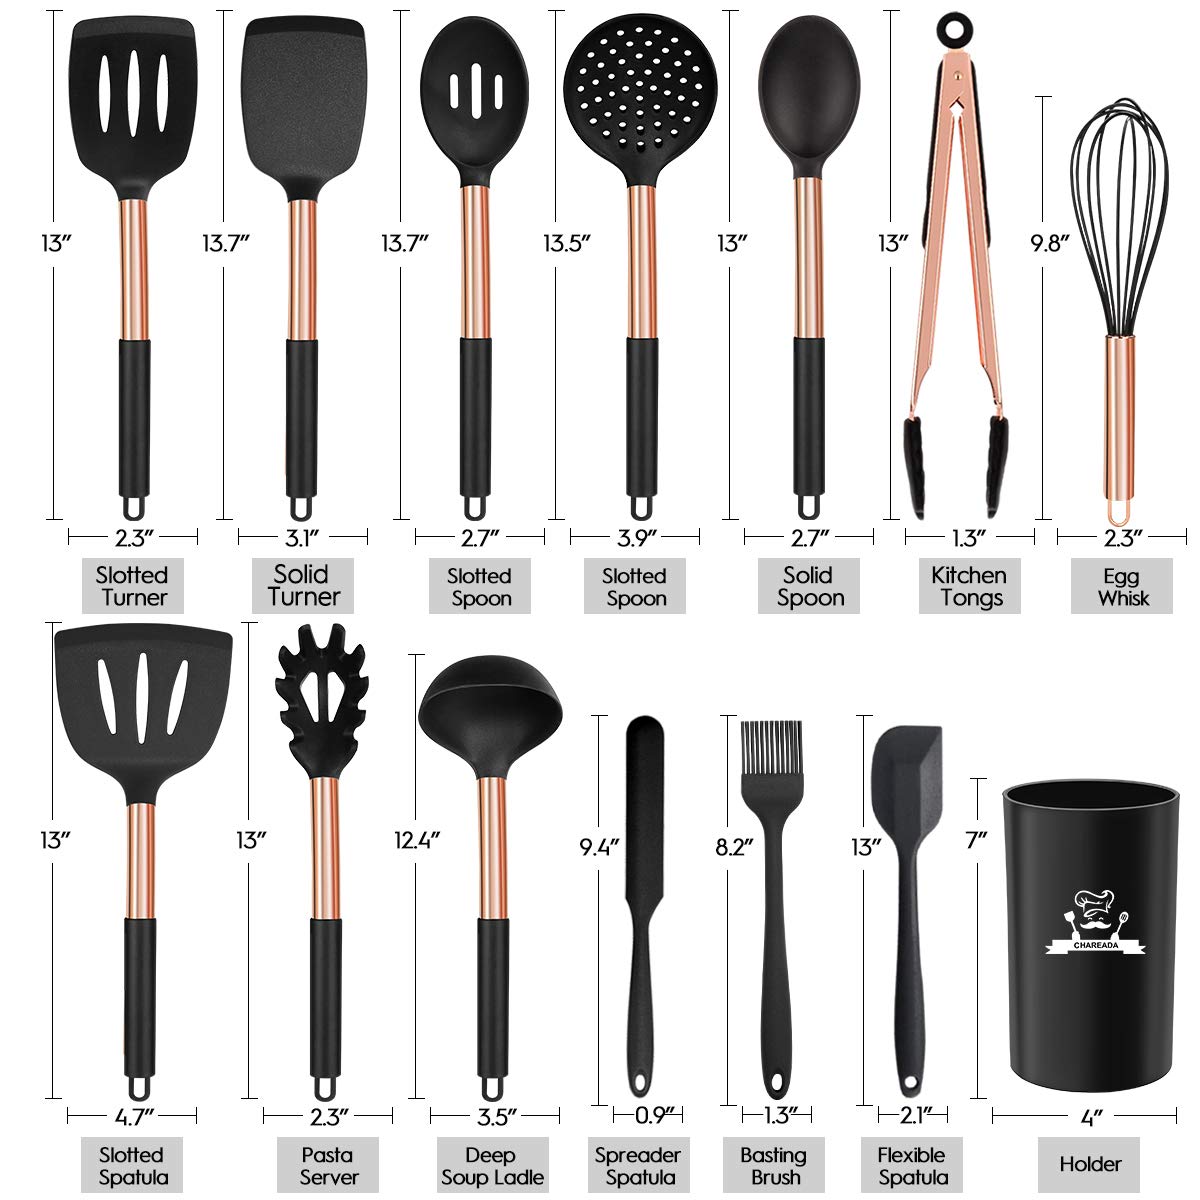 Silicone Cooking Utensil Set, 14pcs Kitchen Utensils Set Non-stick Heat Resistant Cookware Copper Stainless Steel Handle Cooking Tools Turner Tongs Spatula Spoon - BPA Free, Non Toxic